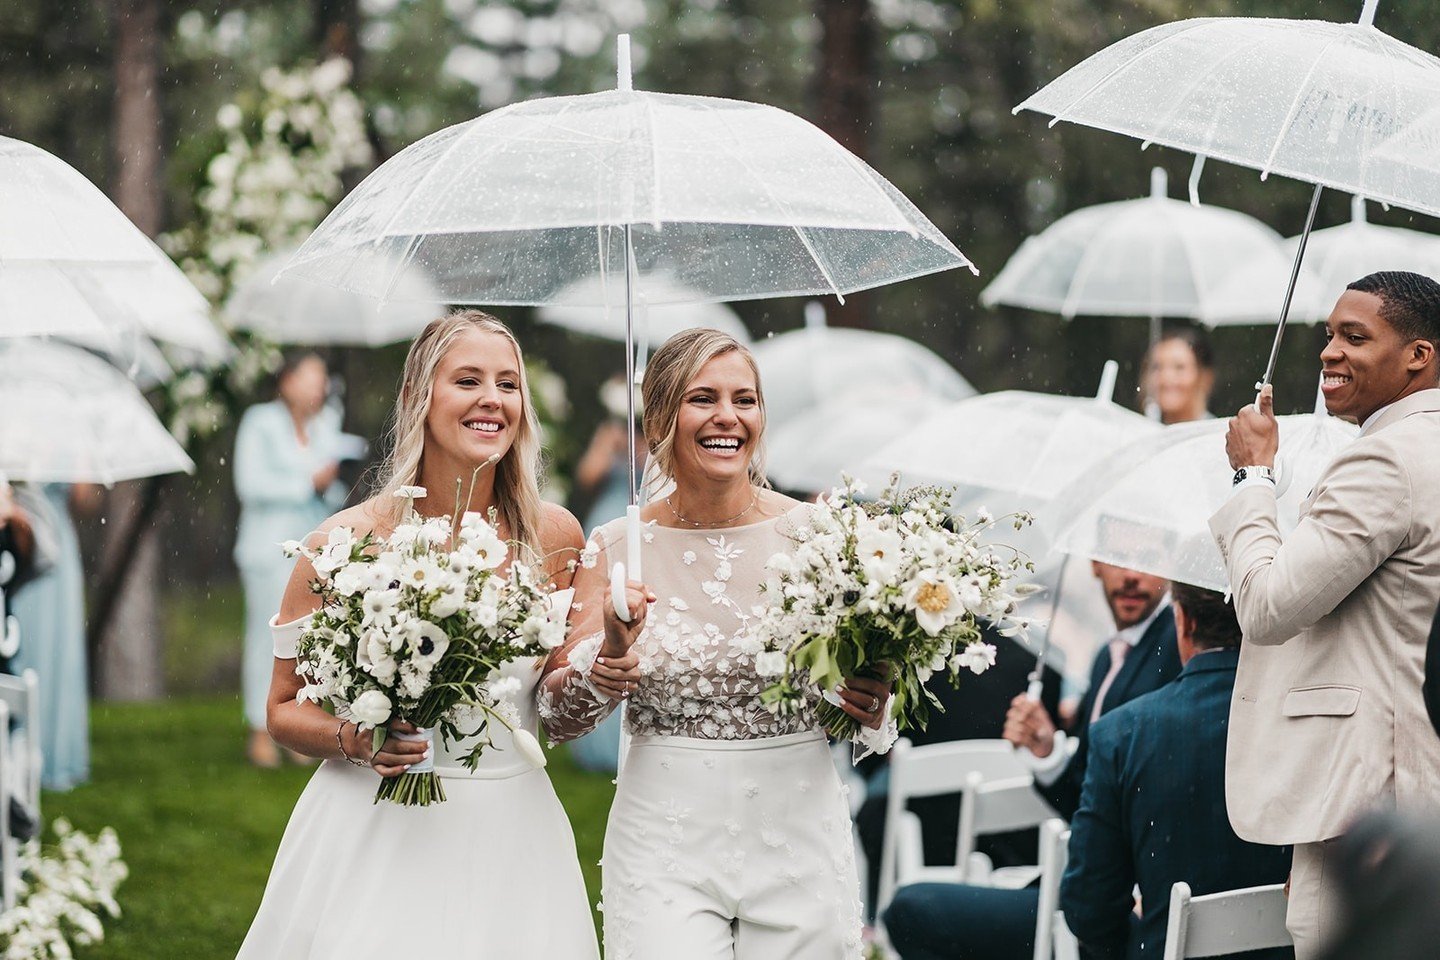 Looking back at some of the moments from an all-time favorite day from last year. Despite this being the worst weather we've ever had during a wedding the whole day was centered around love and commitment. With everyone being so incredibly present an